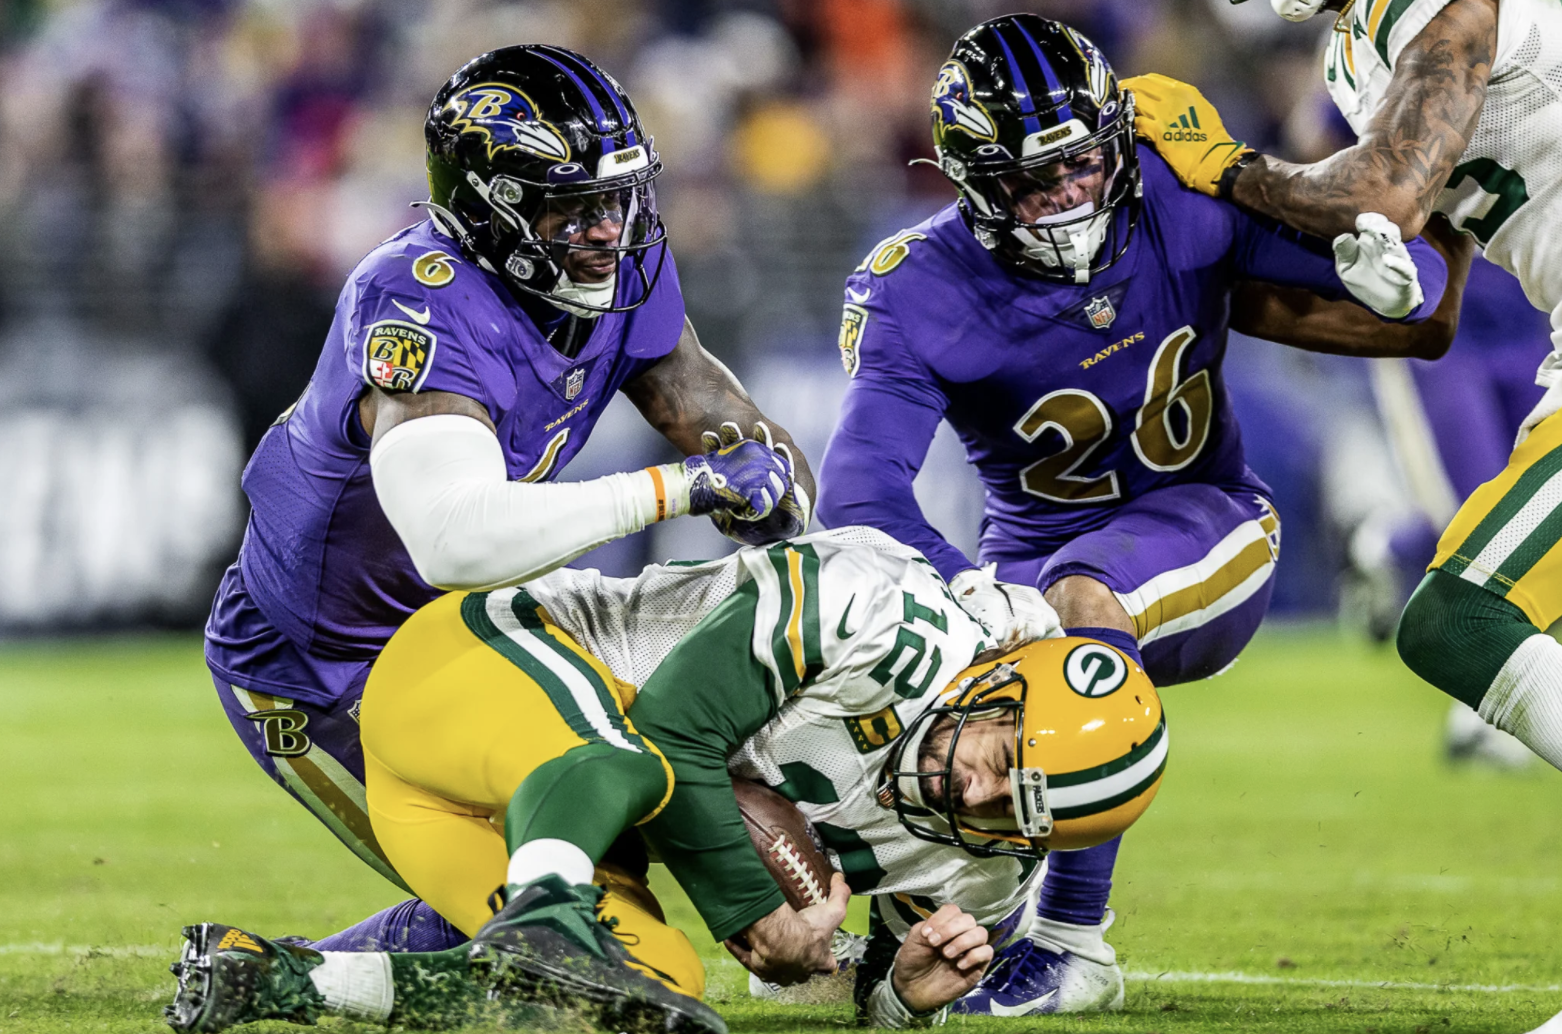 Dec 19, 2021; Baltimore, Maryland, USA; Green Bay Packers quarterback Aaron Rodgers (12) is tackled in the second quarter while defended by Baltimore Ravens linebacker Patrick Queen (6) at M&T Bank Stadium. Mandatory Credit: Mitch Stringer-USA TODAY Sports (NFL)